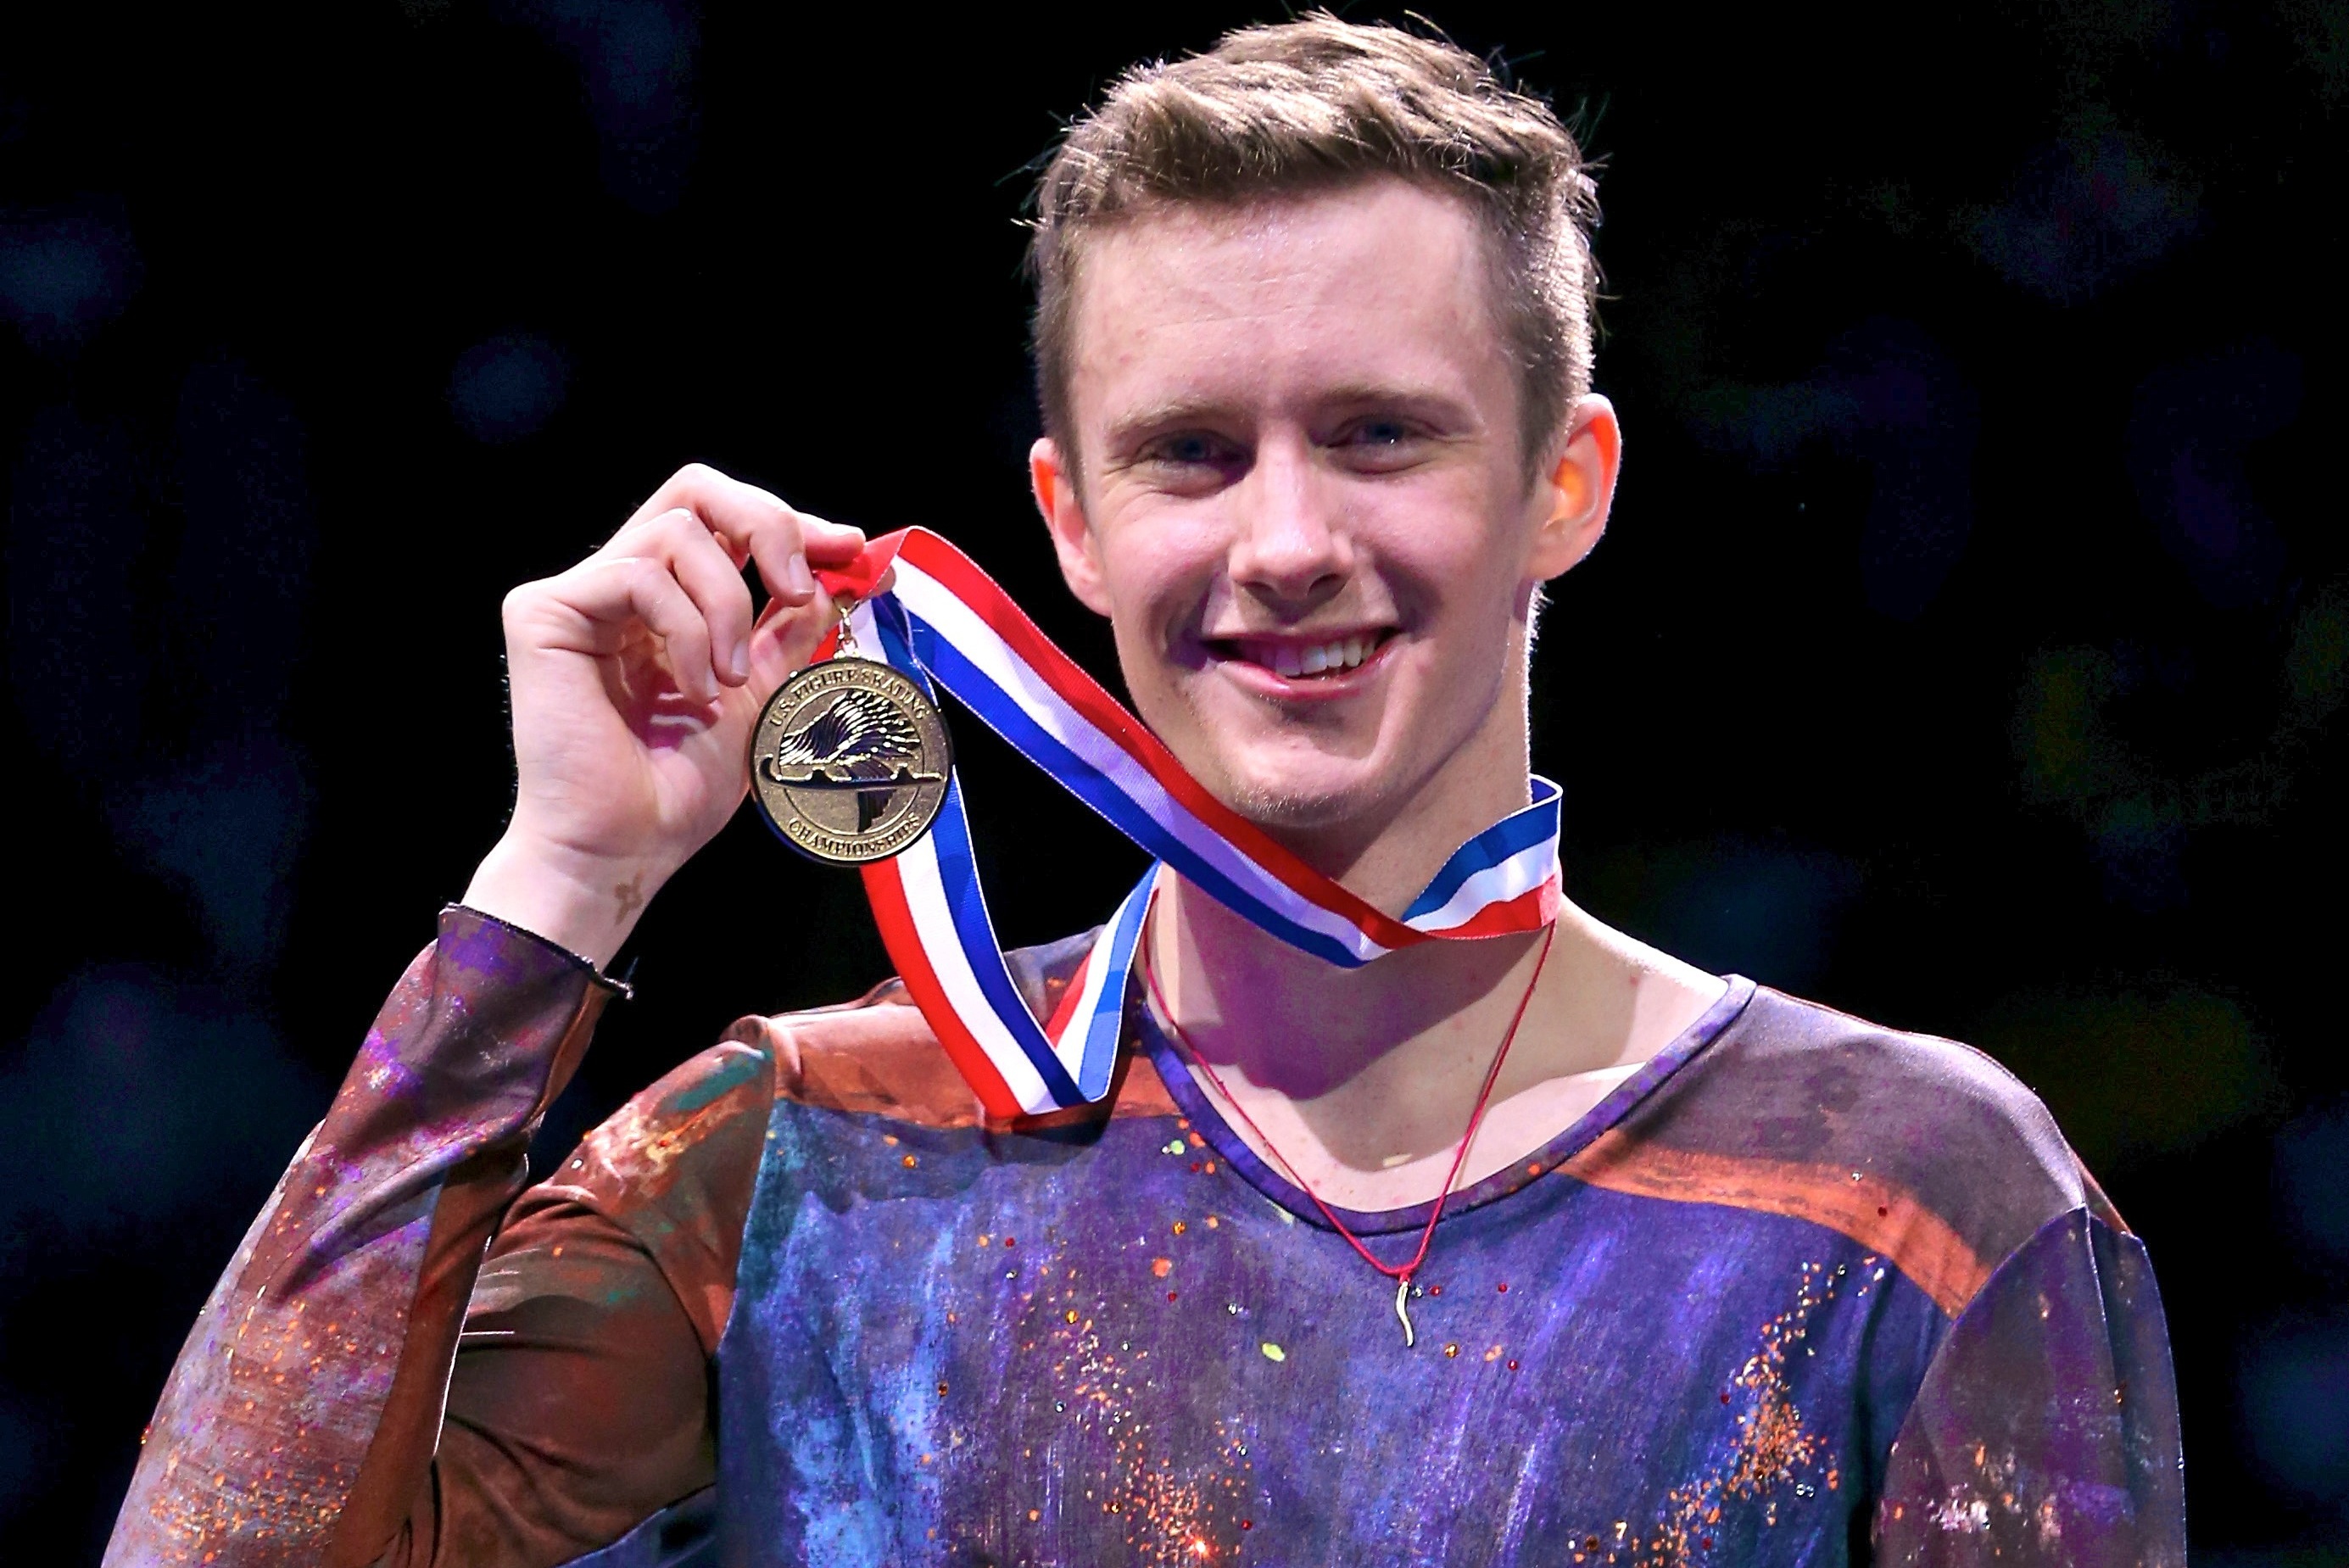 Jeremy Abbott S Last Crusade Us Figure Skating Champ Earns Olympic Swan Song News Scores Highlights Stats And Rumors Bleacher Report